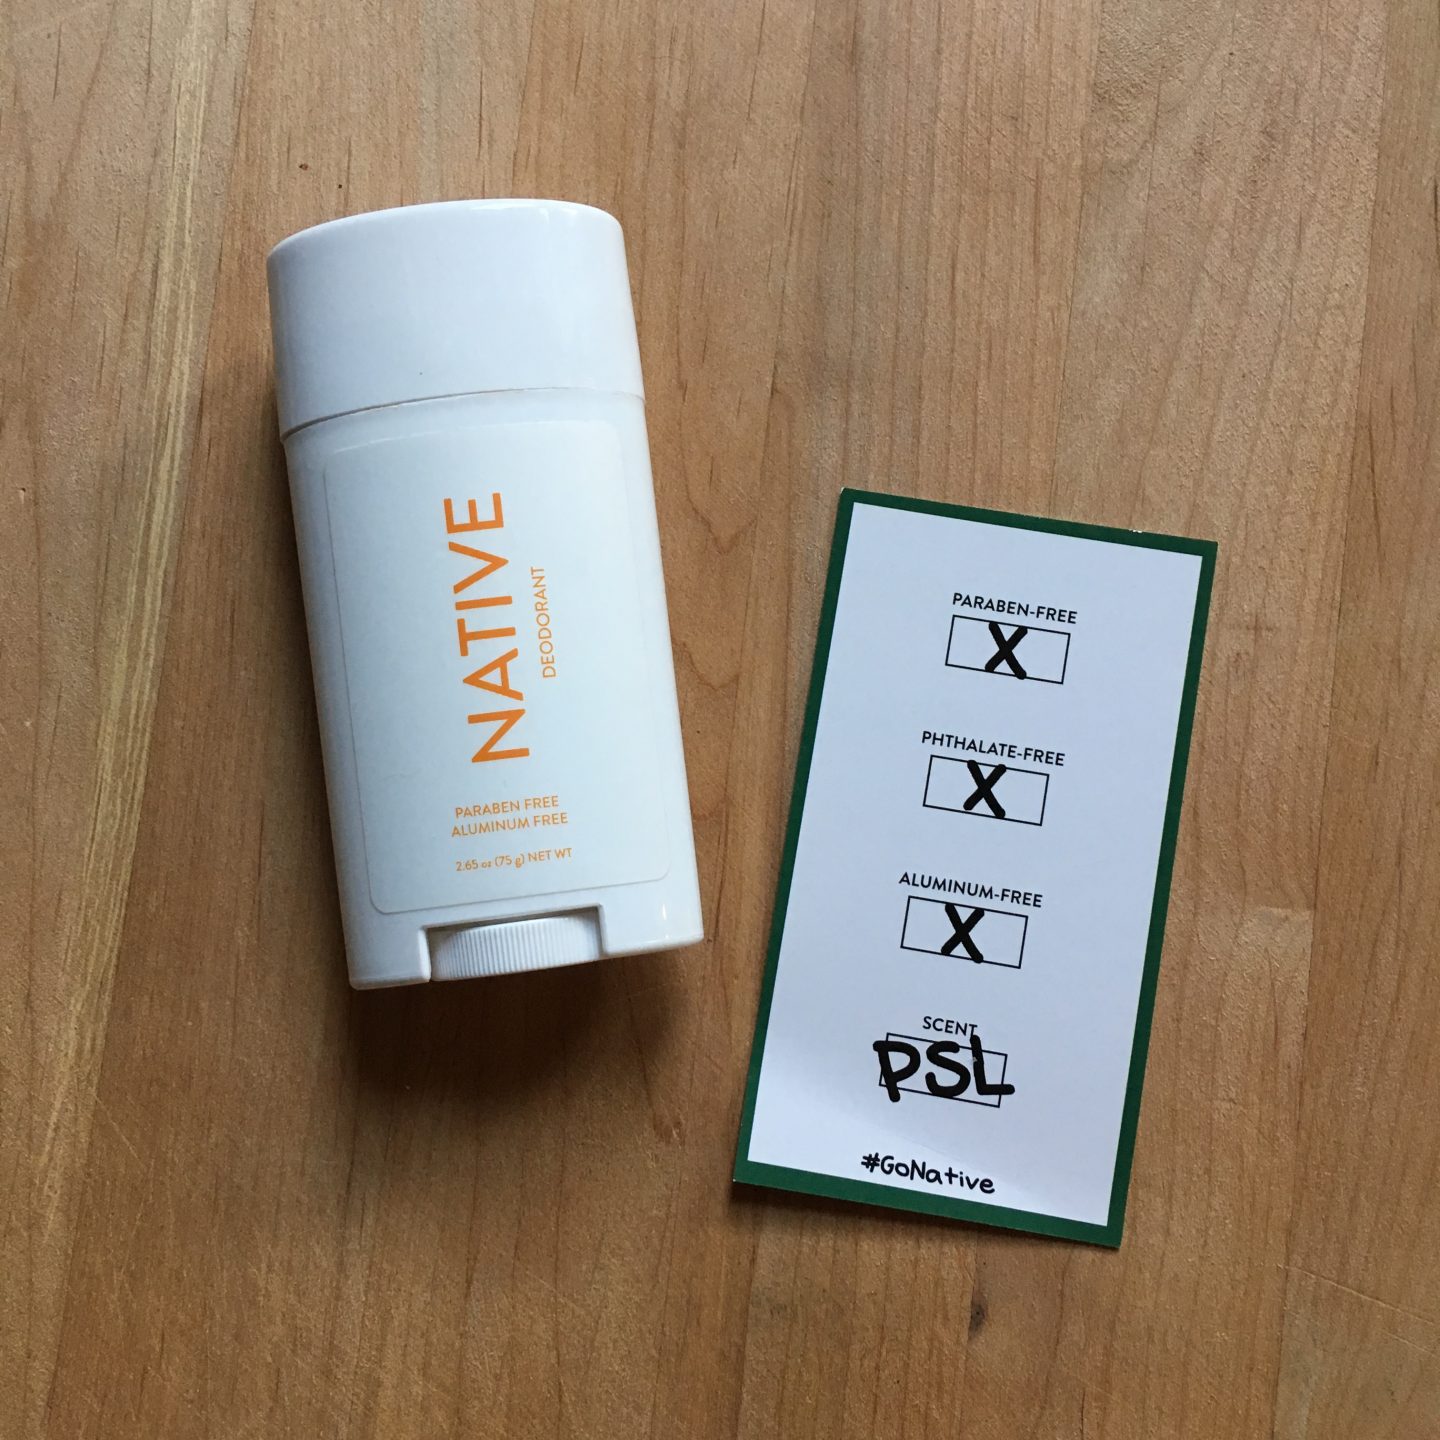 Trying out Pumpkin Spice Natural Deodorant  | Native Review